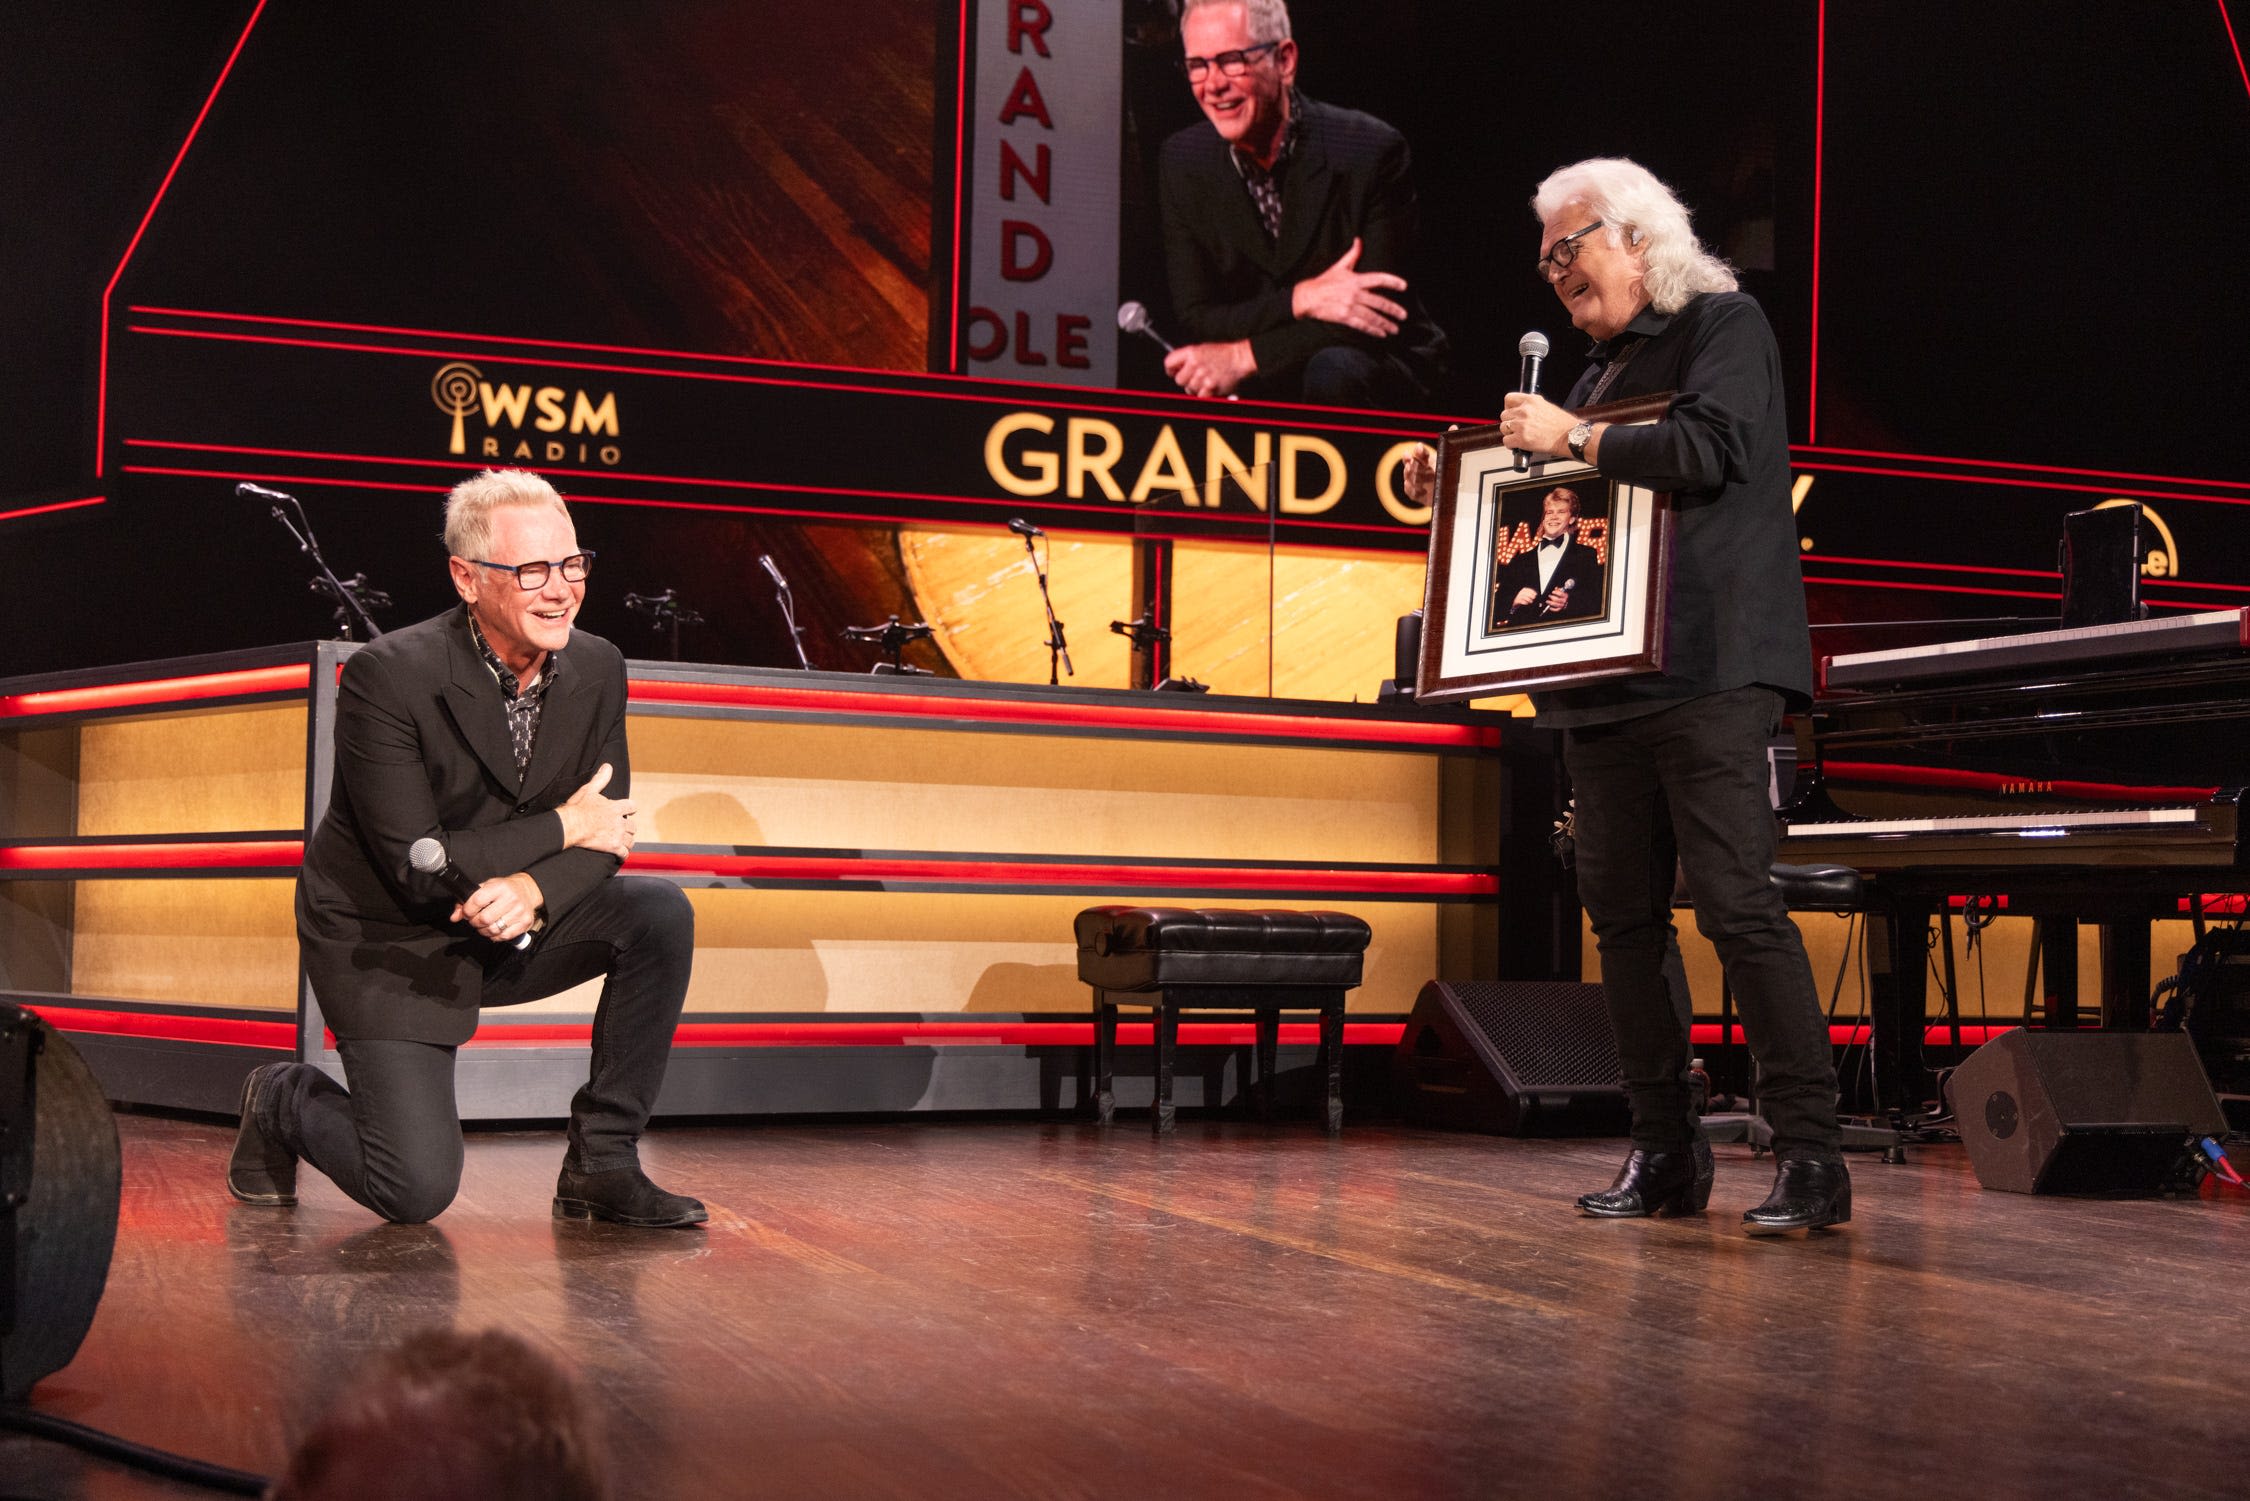 Steven Curtis Chapman invited to become member of the Grand Ole Opry cast